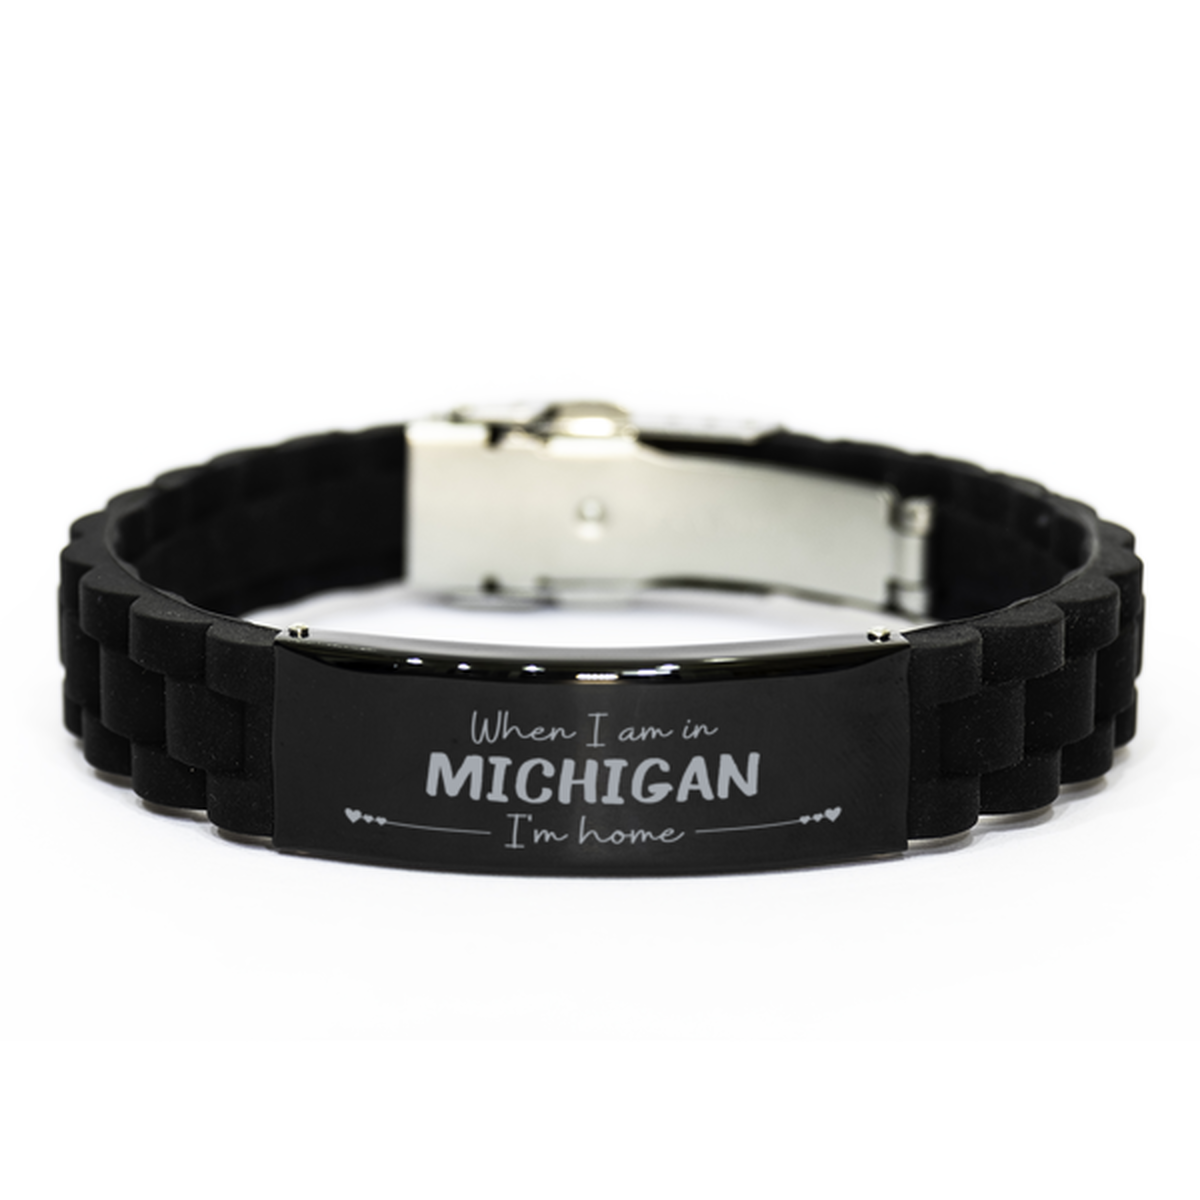 When I am in Michigan I'm home Black Glidelock Clasp Bracelet, Cheap Gifts For Michigan, State Michigan Birthday Gifts for Friends Coworker